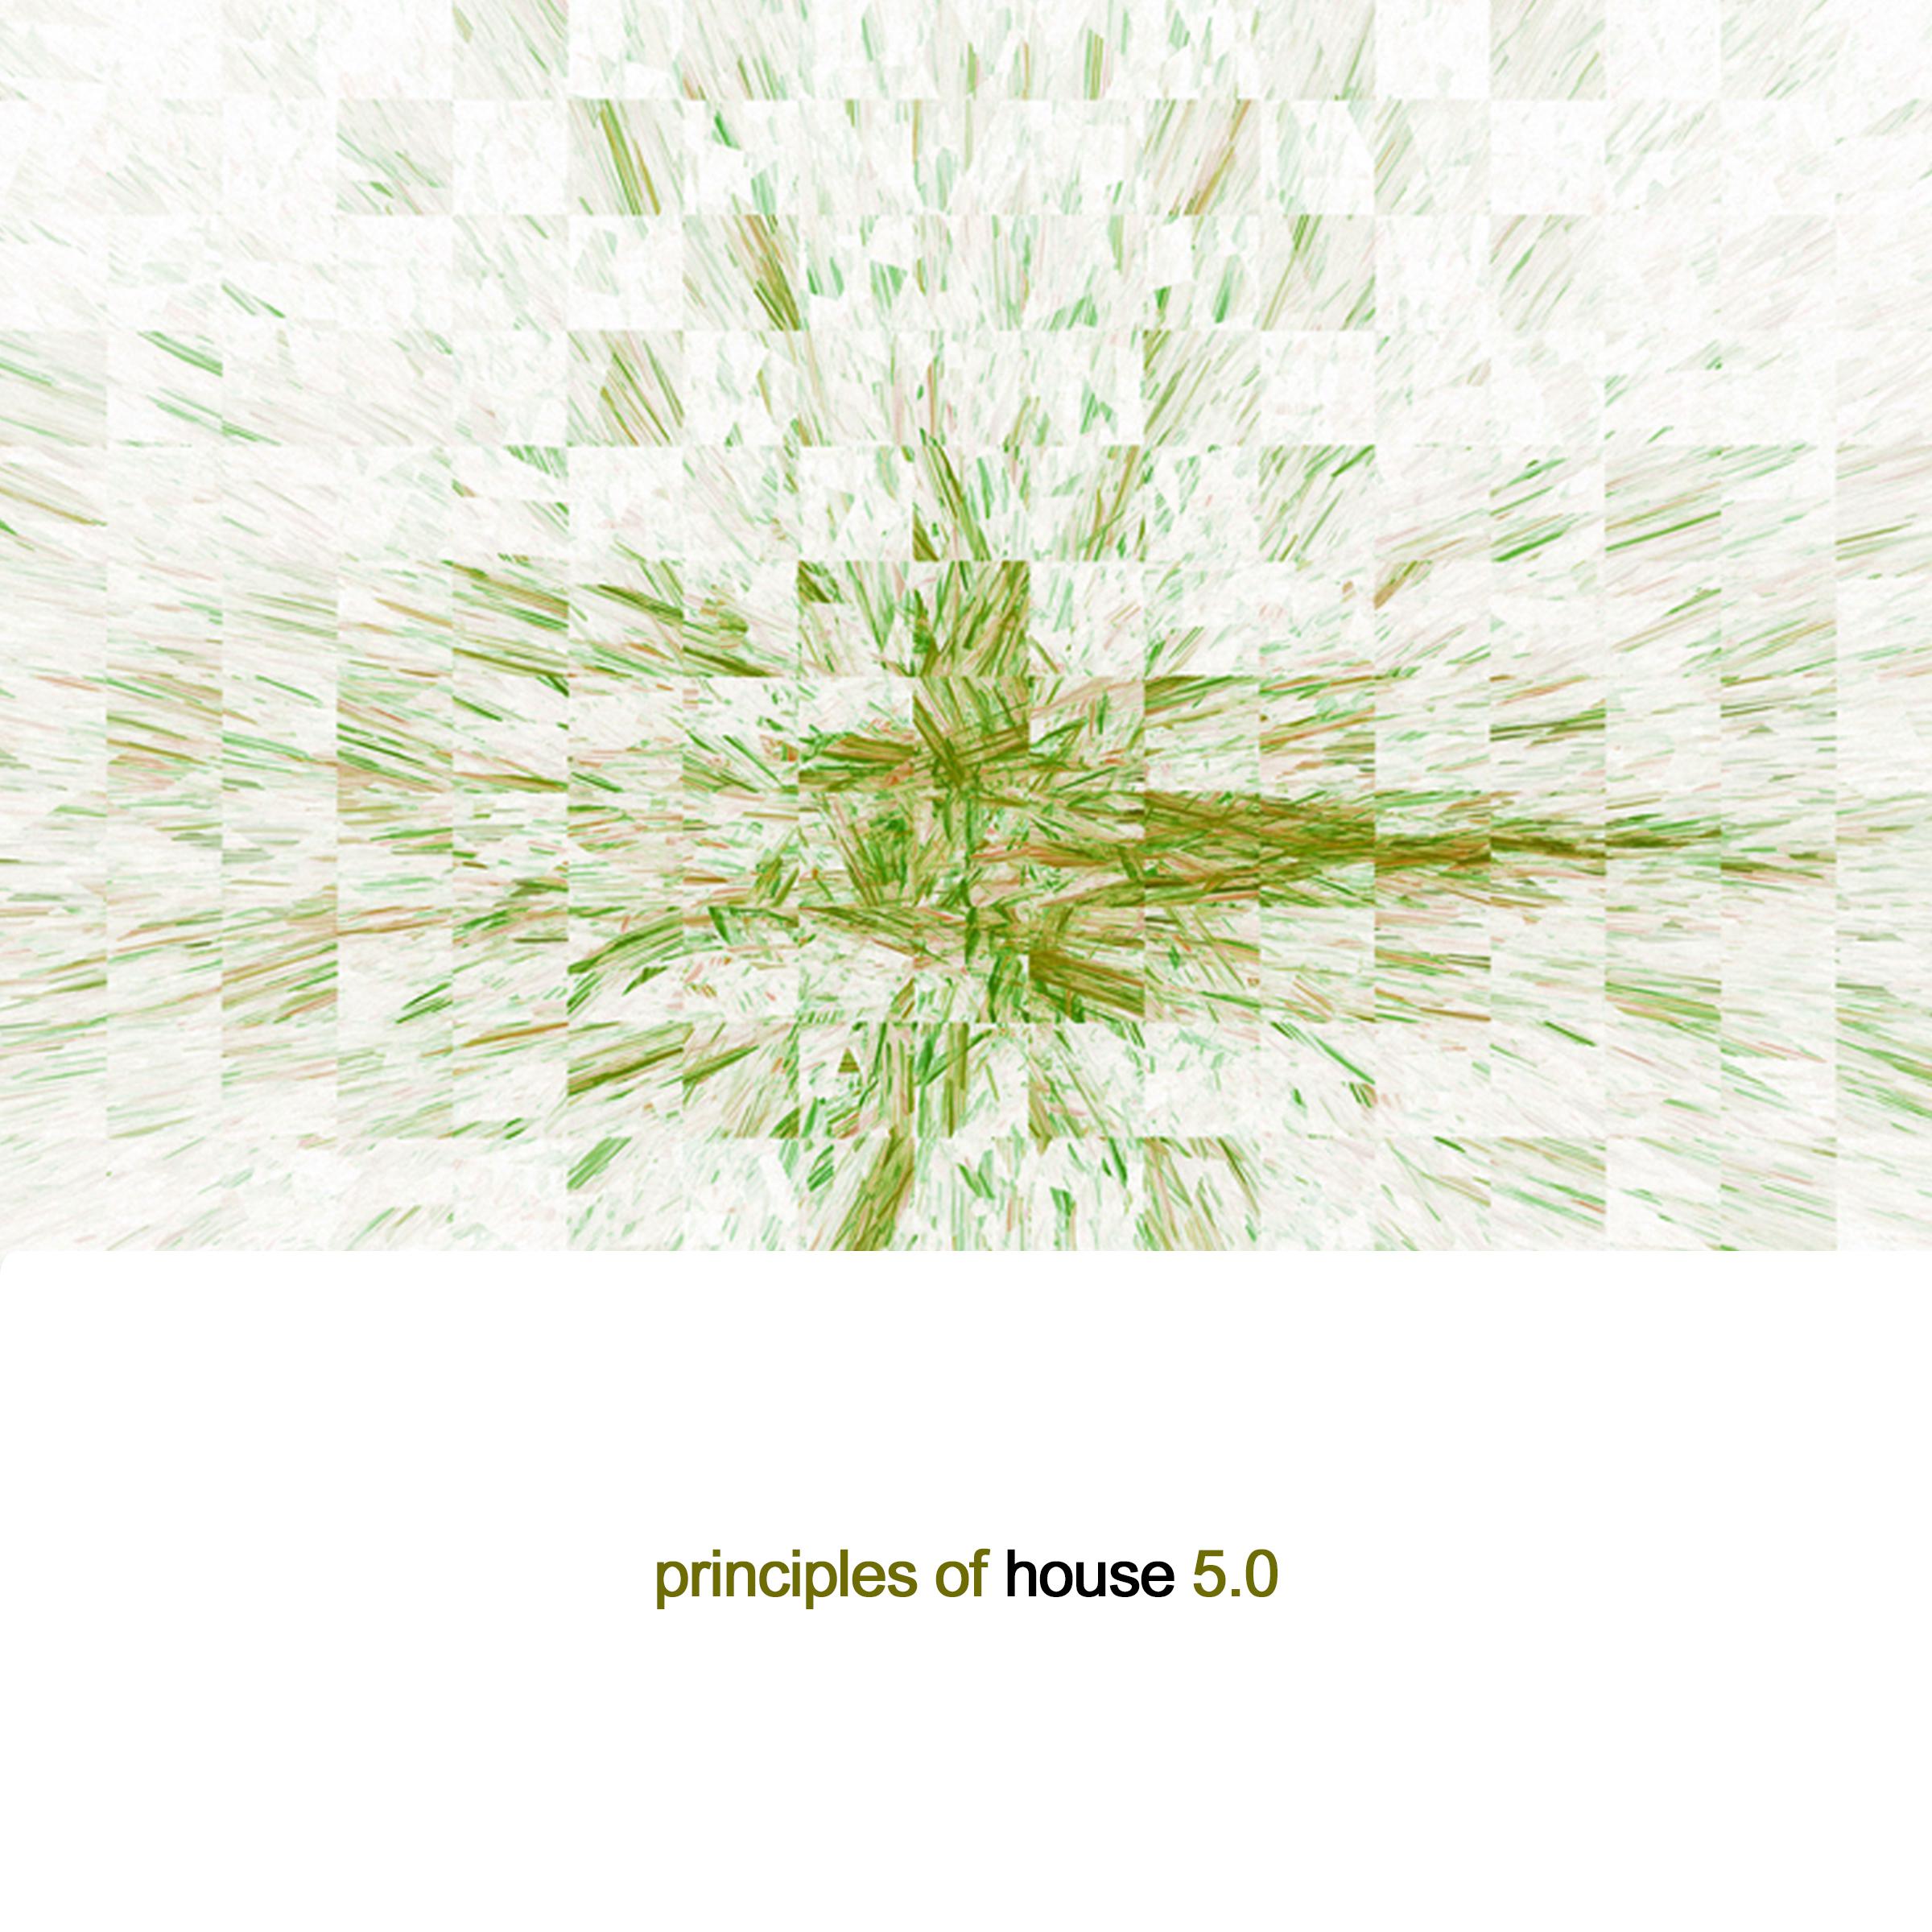 Principles of House 5.0